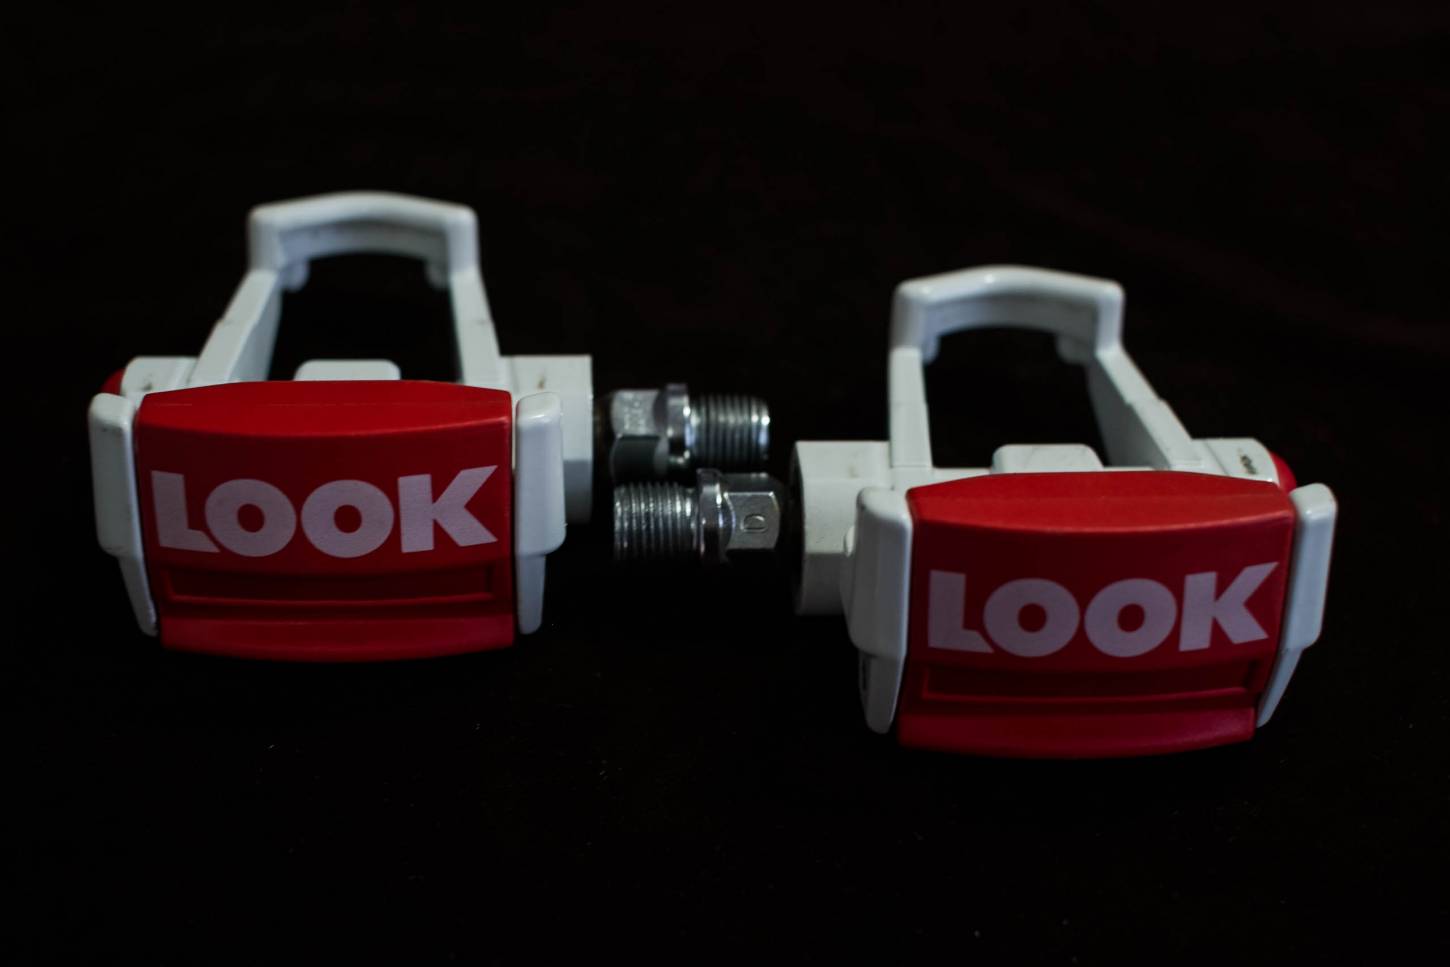 Look Clipless Pedals Vintage 9/16" x 20 thread white/red aluminium road bike